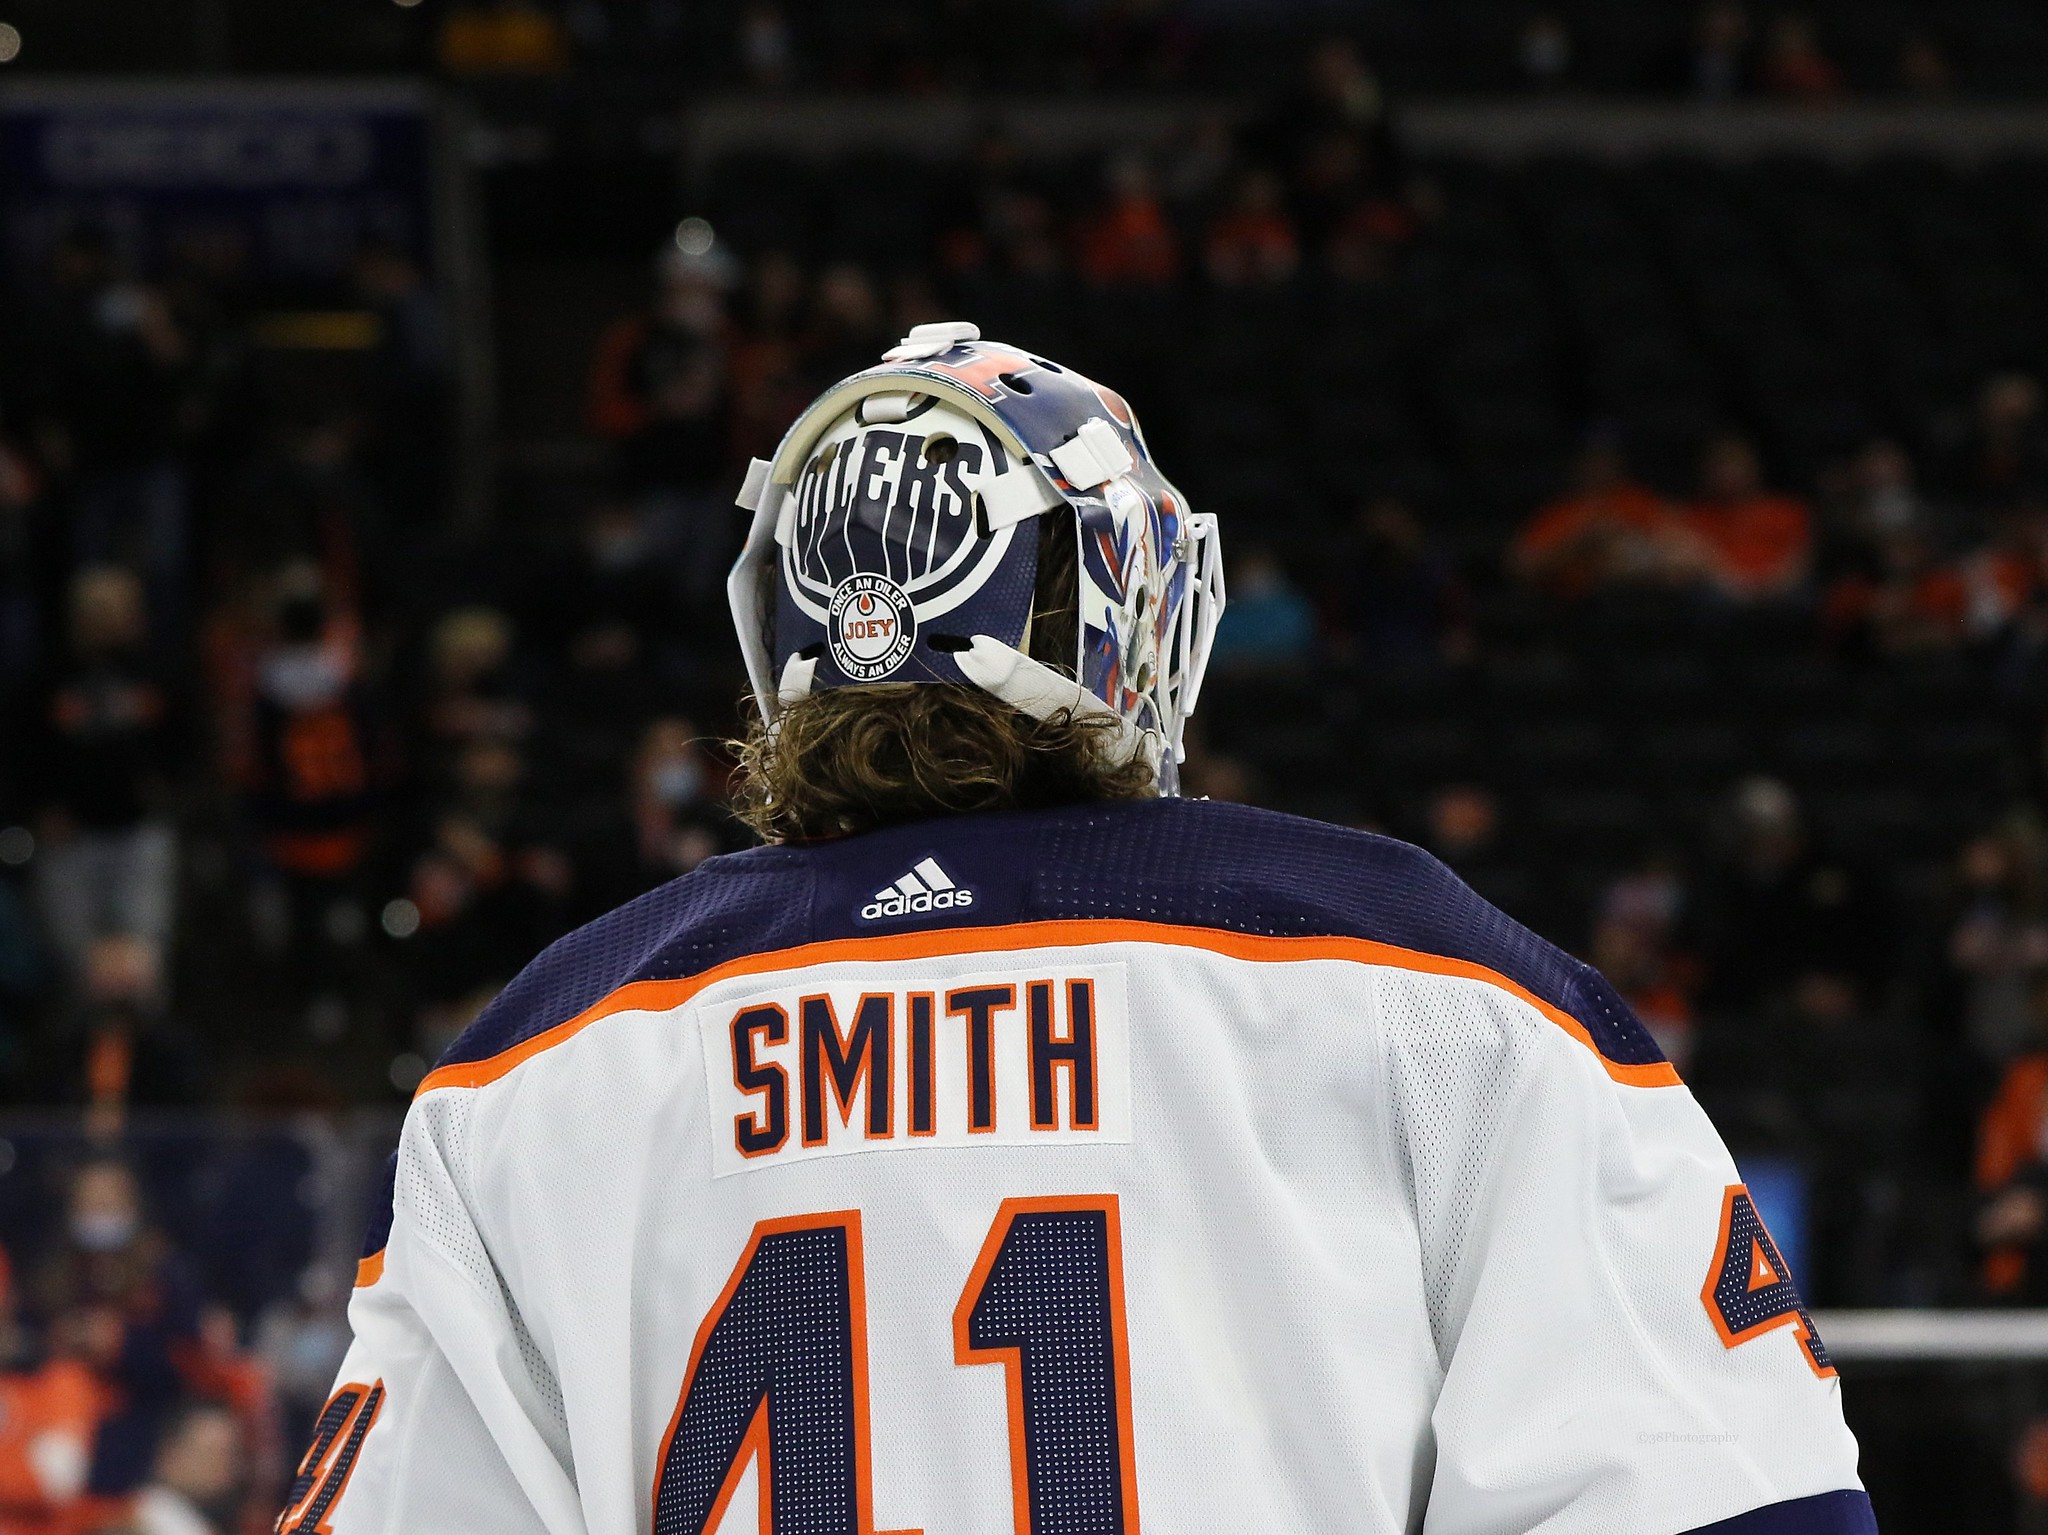 Edmonton Oilers' veteran goalie Mike Smith relishes another playoff chance